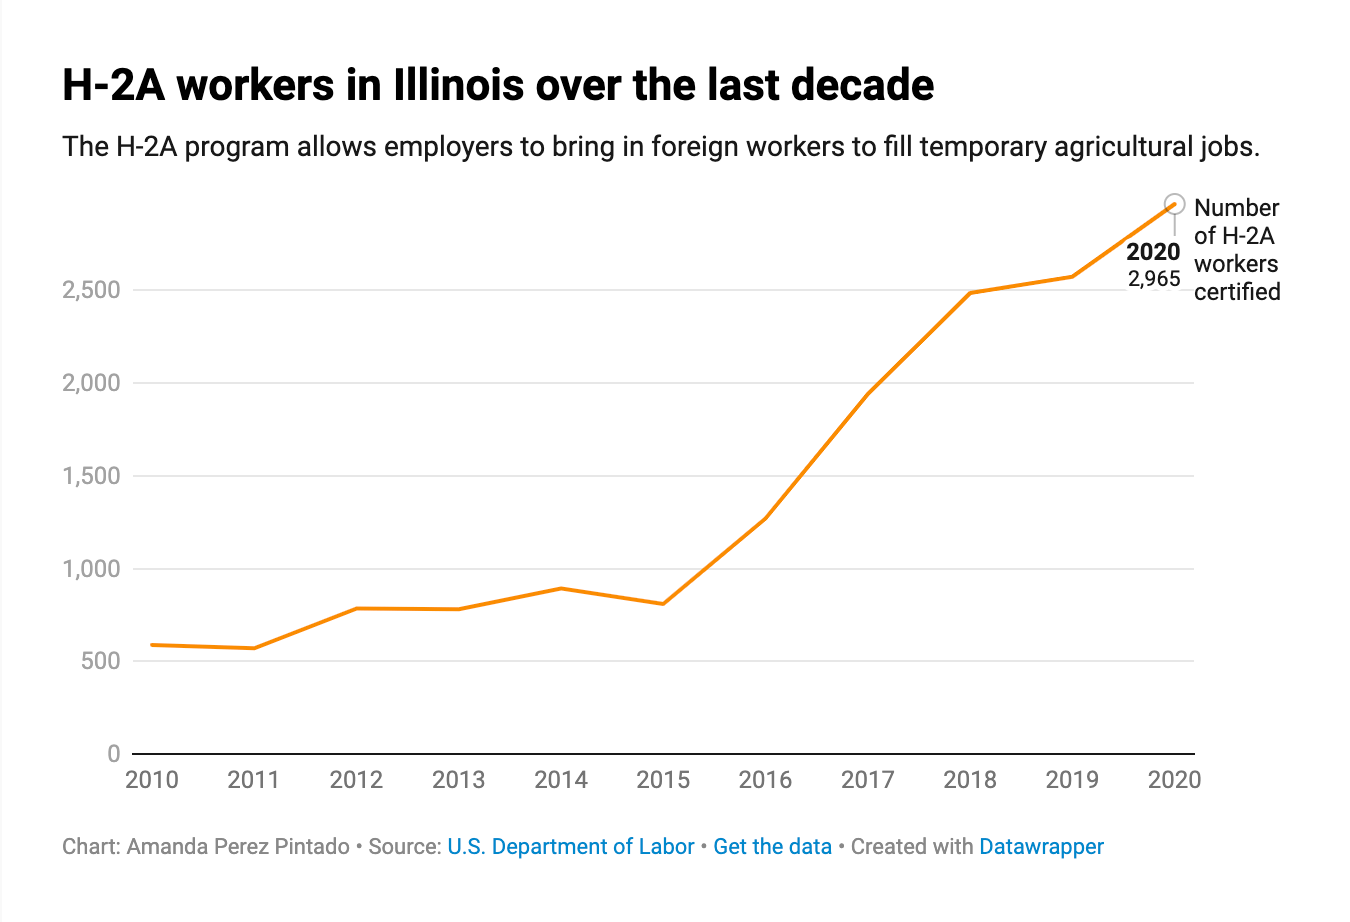 Chart of H-2A workers in Illinois over the last decade, 2010-2020.